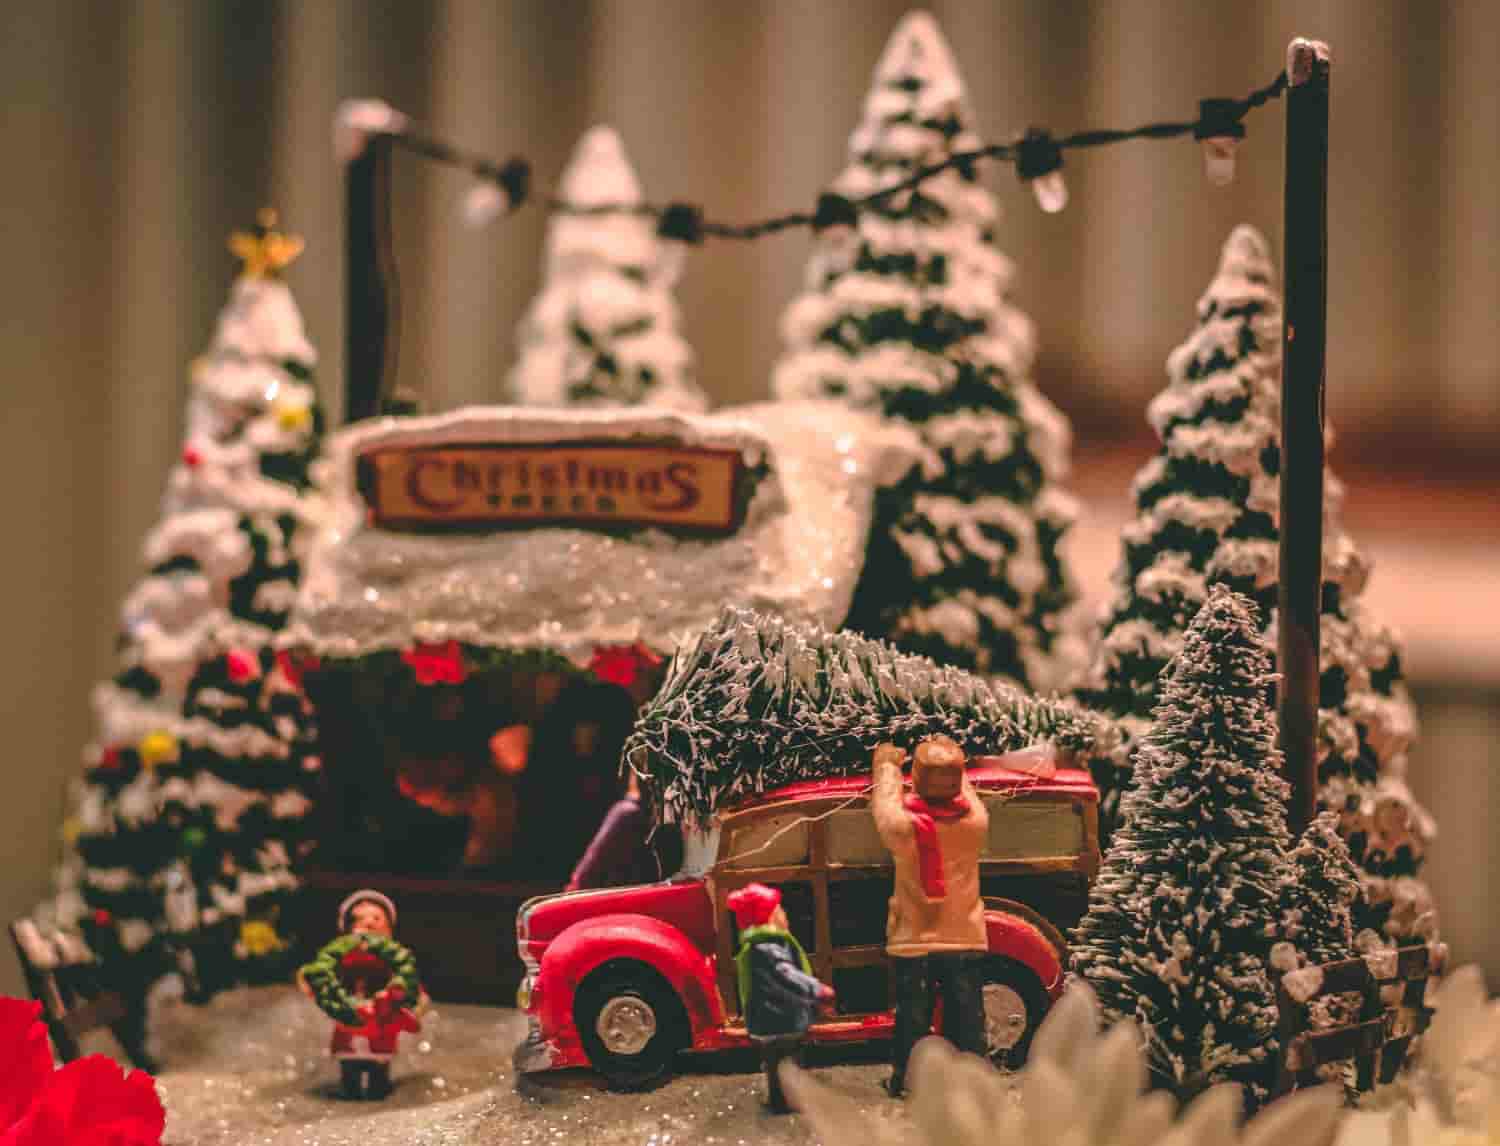 A nice diorama of a car, a dad, two kids and 6 trees with a Christmas Tree store.